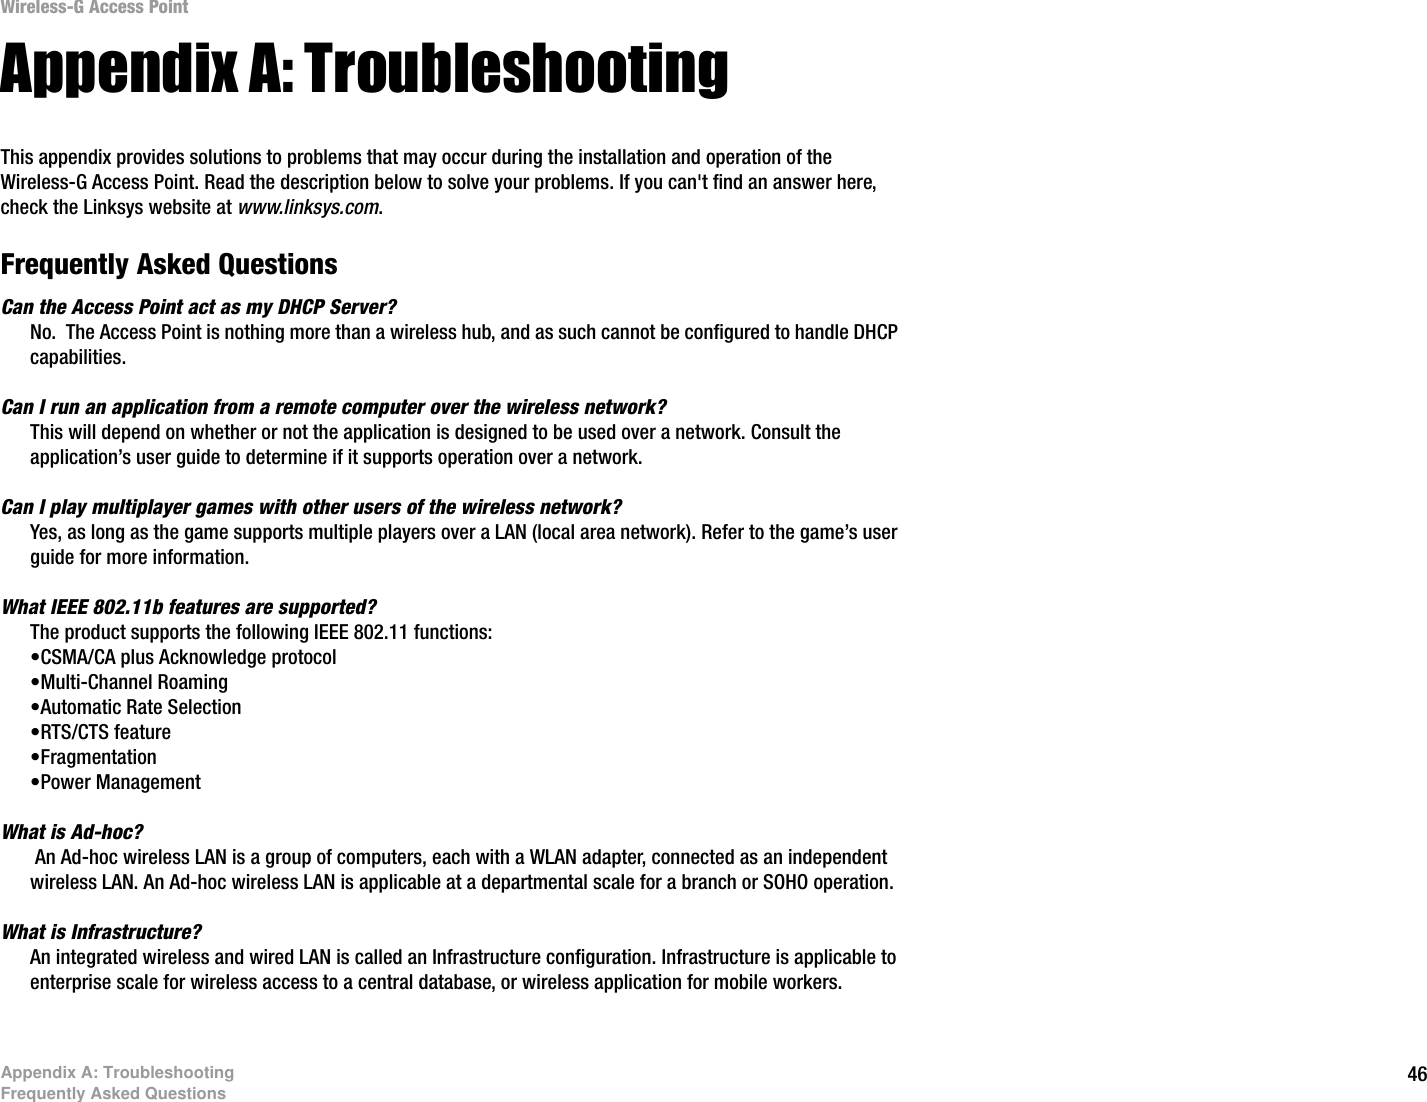 46Appendix A: TroubleshootingFrequently Asked QuestionsWireless-G Access PointAppendix A: TroubleshootingThis appendix provides solutions to problems that may occur during the installation and operation of the Wireless-G Access Point. Read the description below to solve your problems. If you can&apos;t find an answer here, check the Linksys website at www.linksys.com.Frequently Asked QuestionsCan the Access Point act as my DHCP Server?No.  The Access Point is nothing more than a wireless hub, and as such cannot be configured to handle DHCP capabilities.Can I run an application from a remote computer over the wireless network?This will depend on whether or not the application is designed to be used over a network. Consult the application’s user guide to determine if it supports operation over a network.Can I play multiplayer games with other users of the wireless network?Yes, as long as the game supports multiple players over a LAN (local area network). Refer to the game’s user guide for more information.What IEEE 802.11b features are supported?The product supports the following IEEE 802.11 functions: •CSMA/CA plus Acknowledge protocol •Multi-Channel Roaming •Automatic Rate Selection •RTS/CTS feature •Fragmentation •Power Management What is Ad-hoc? An Ad-hoc wireless LAN is a group of computers, each with a WLAN adapter, connected as an independent wireless LAN. An Ad-hoc wireless LAN is applicable at a departmental scale for a branch or SOHO operation.What is Infrastructure?An integrated wireless and wired LAN is called an Infrastructure configuration. Infrastructure is applicable to enterprise scale for wireless access to a central database, or wireless application for mobile workers. 